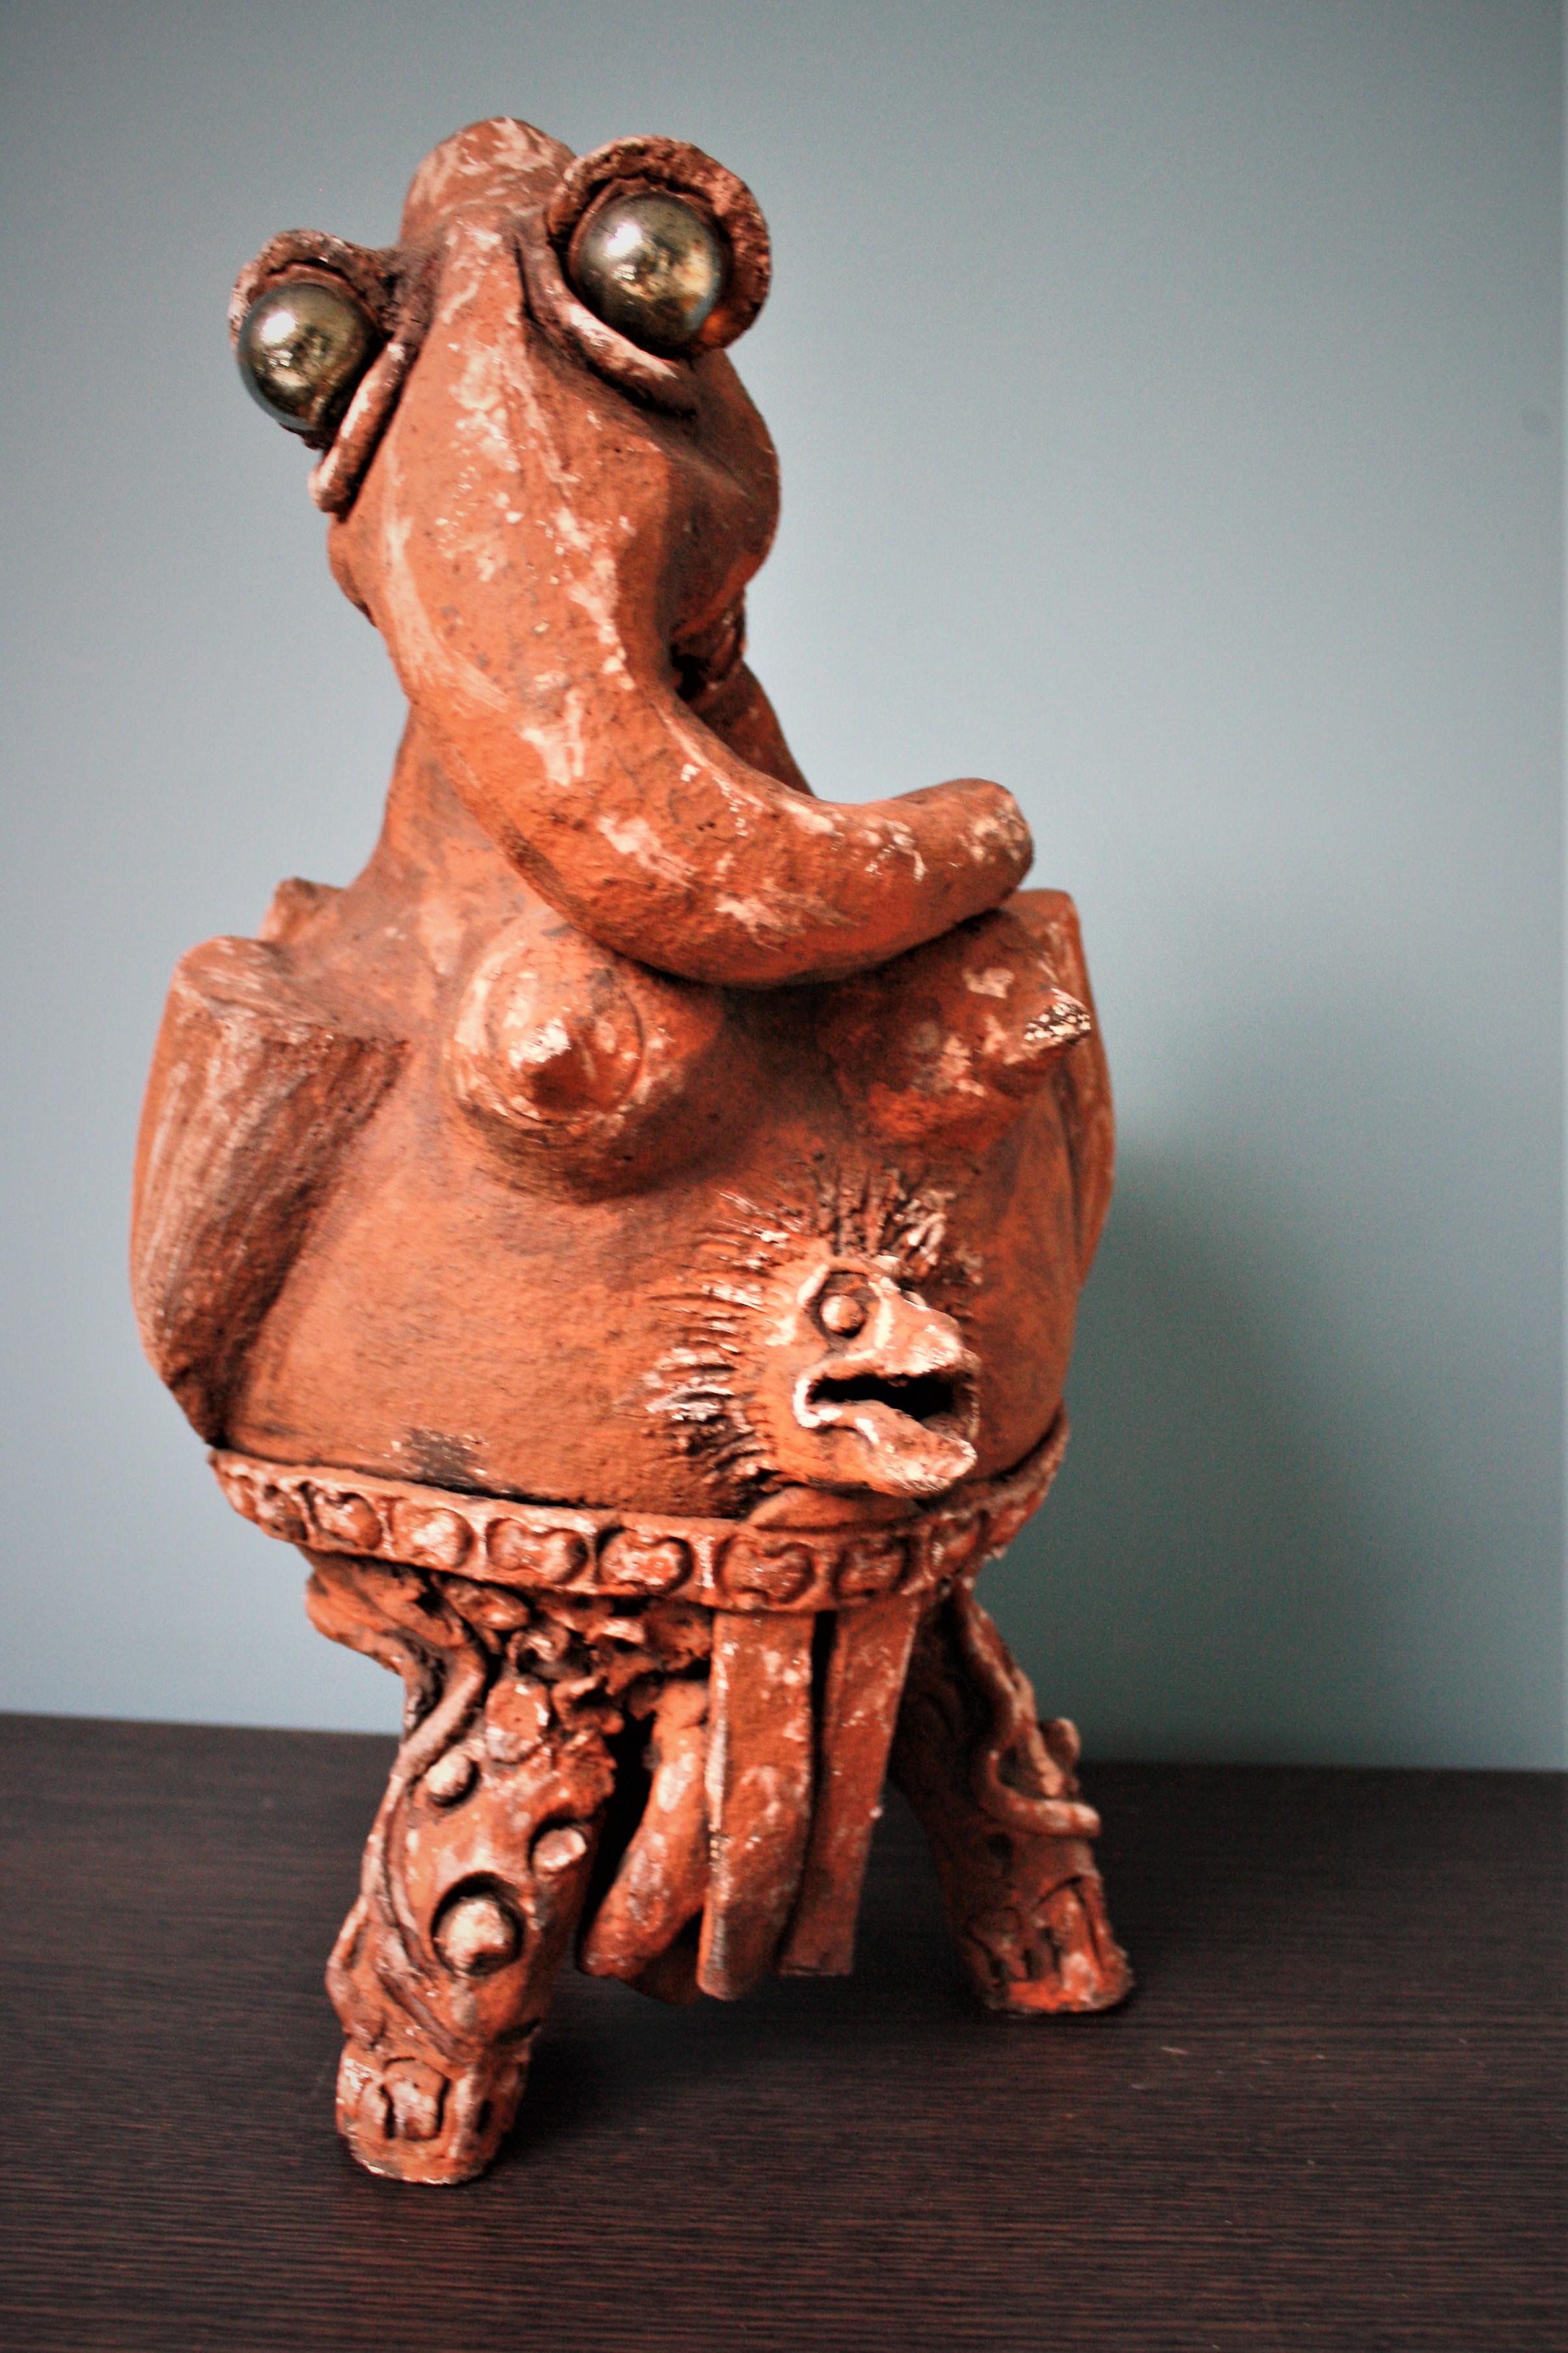 Unusual post demonic or alien-like sculpture in terracotta by Belgian artist Michel Hereman.

He was known for making such strange sculptures which were sold in multiple art galleries in Belgium.

We bought this one without any knowledge and by